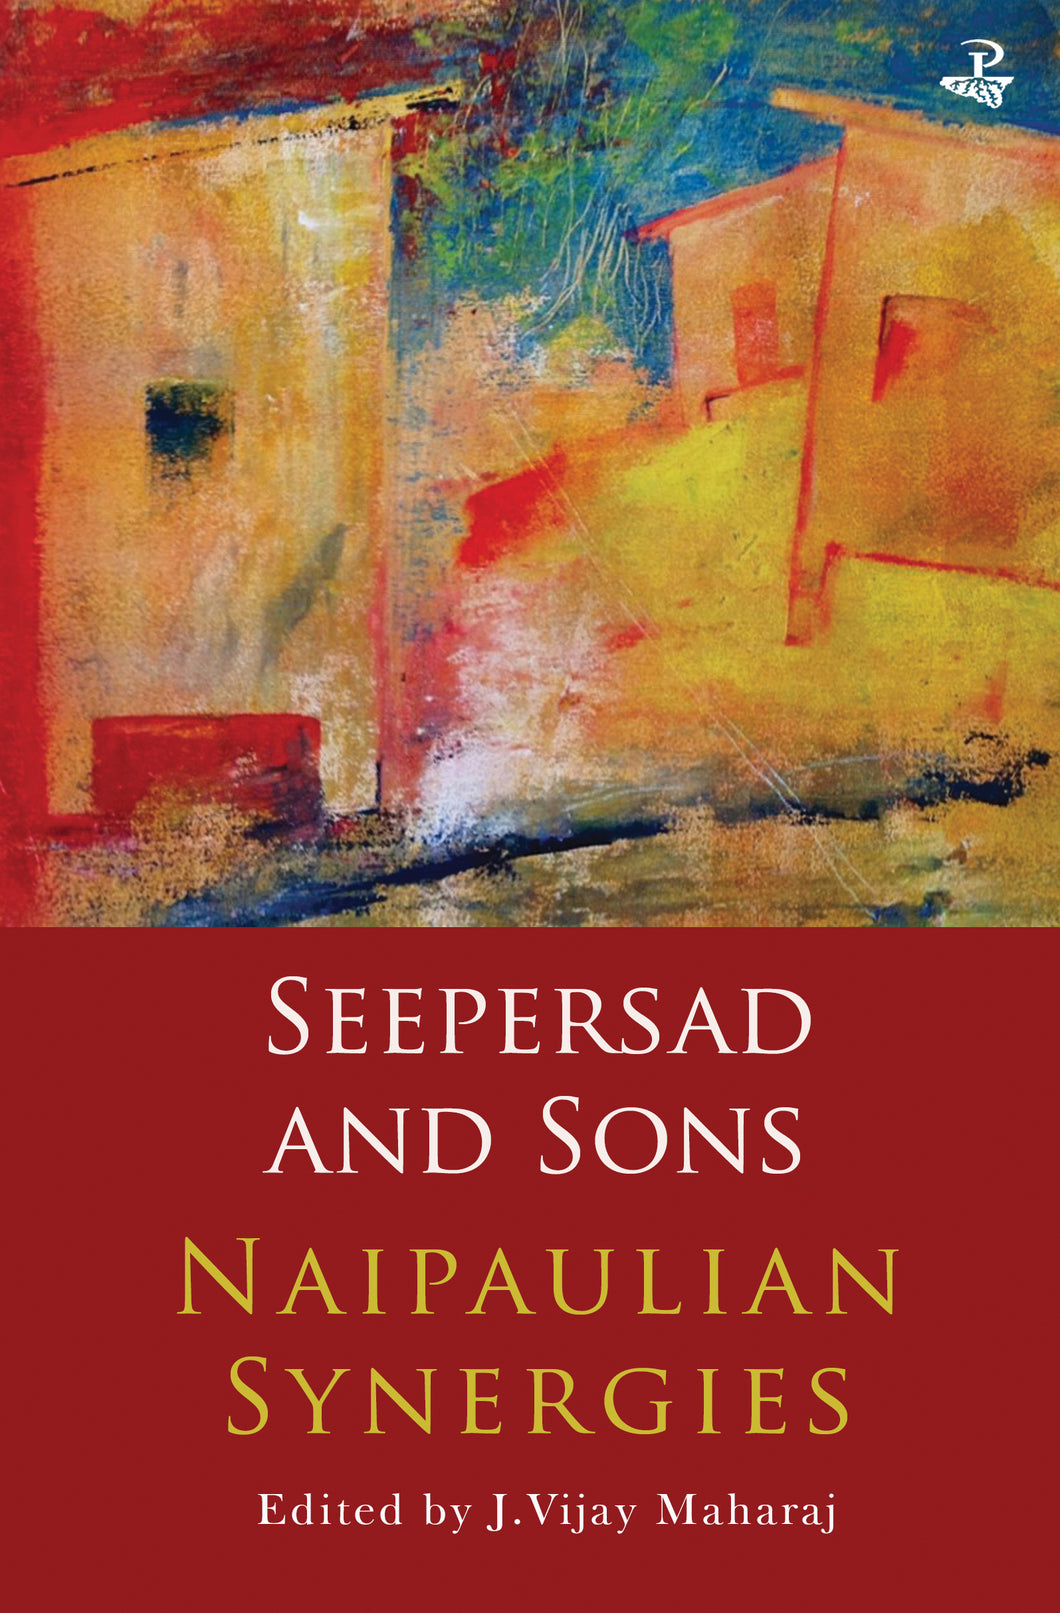 Seepersad and Sons